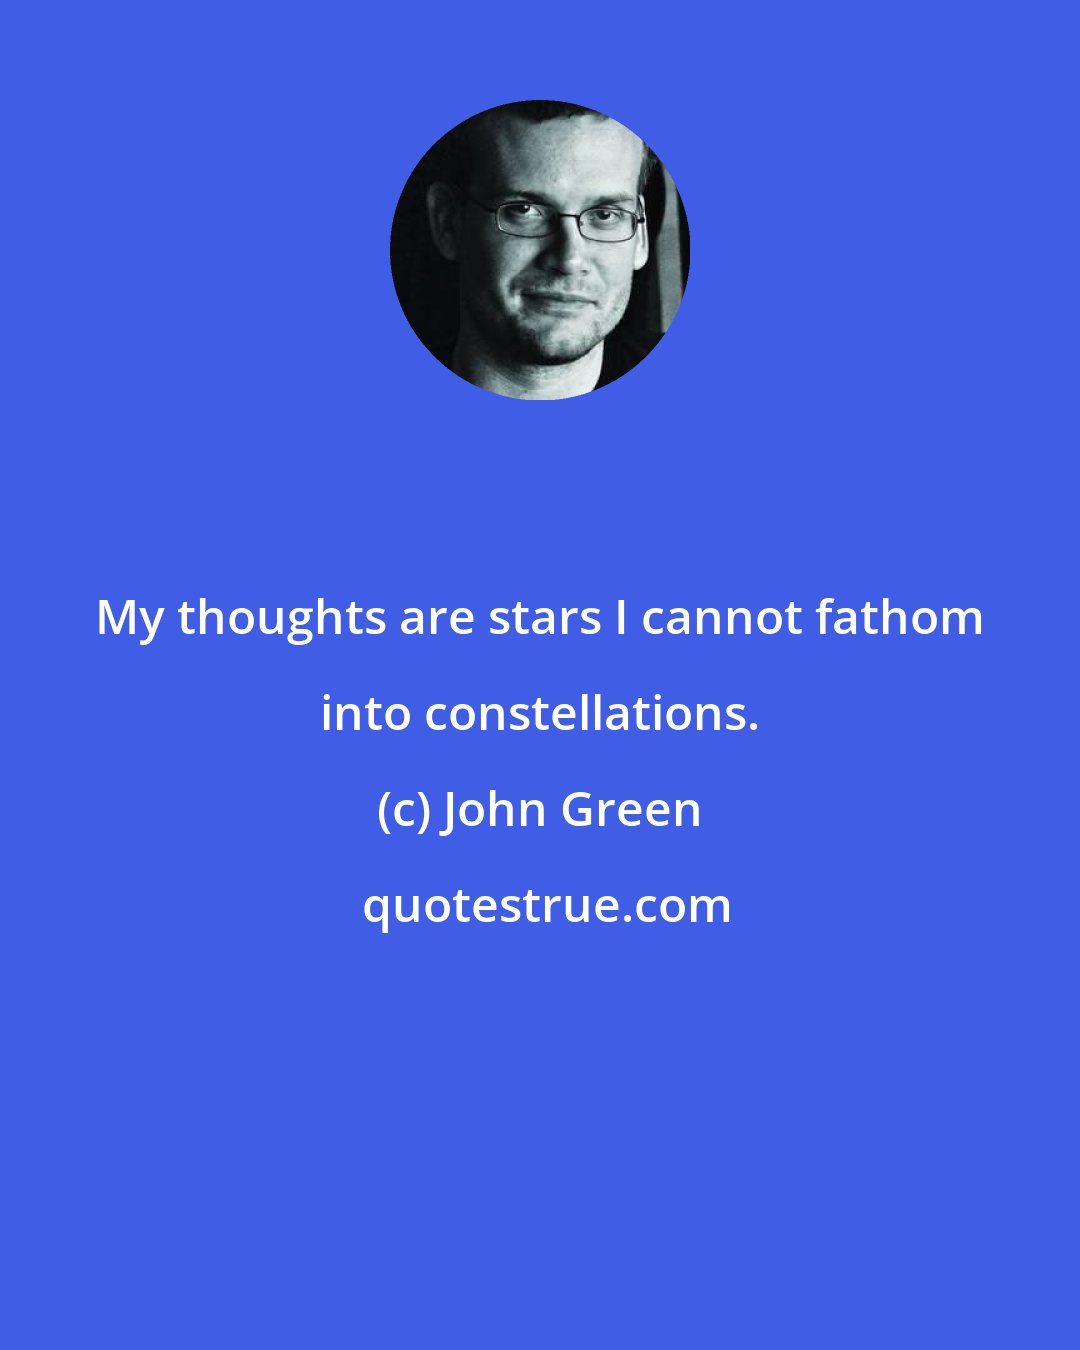 John Green: My thoughts are stars I cannot fathom into constellations.